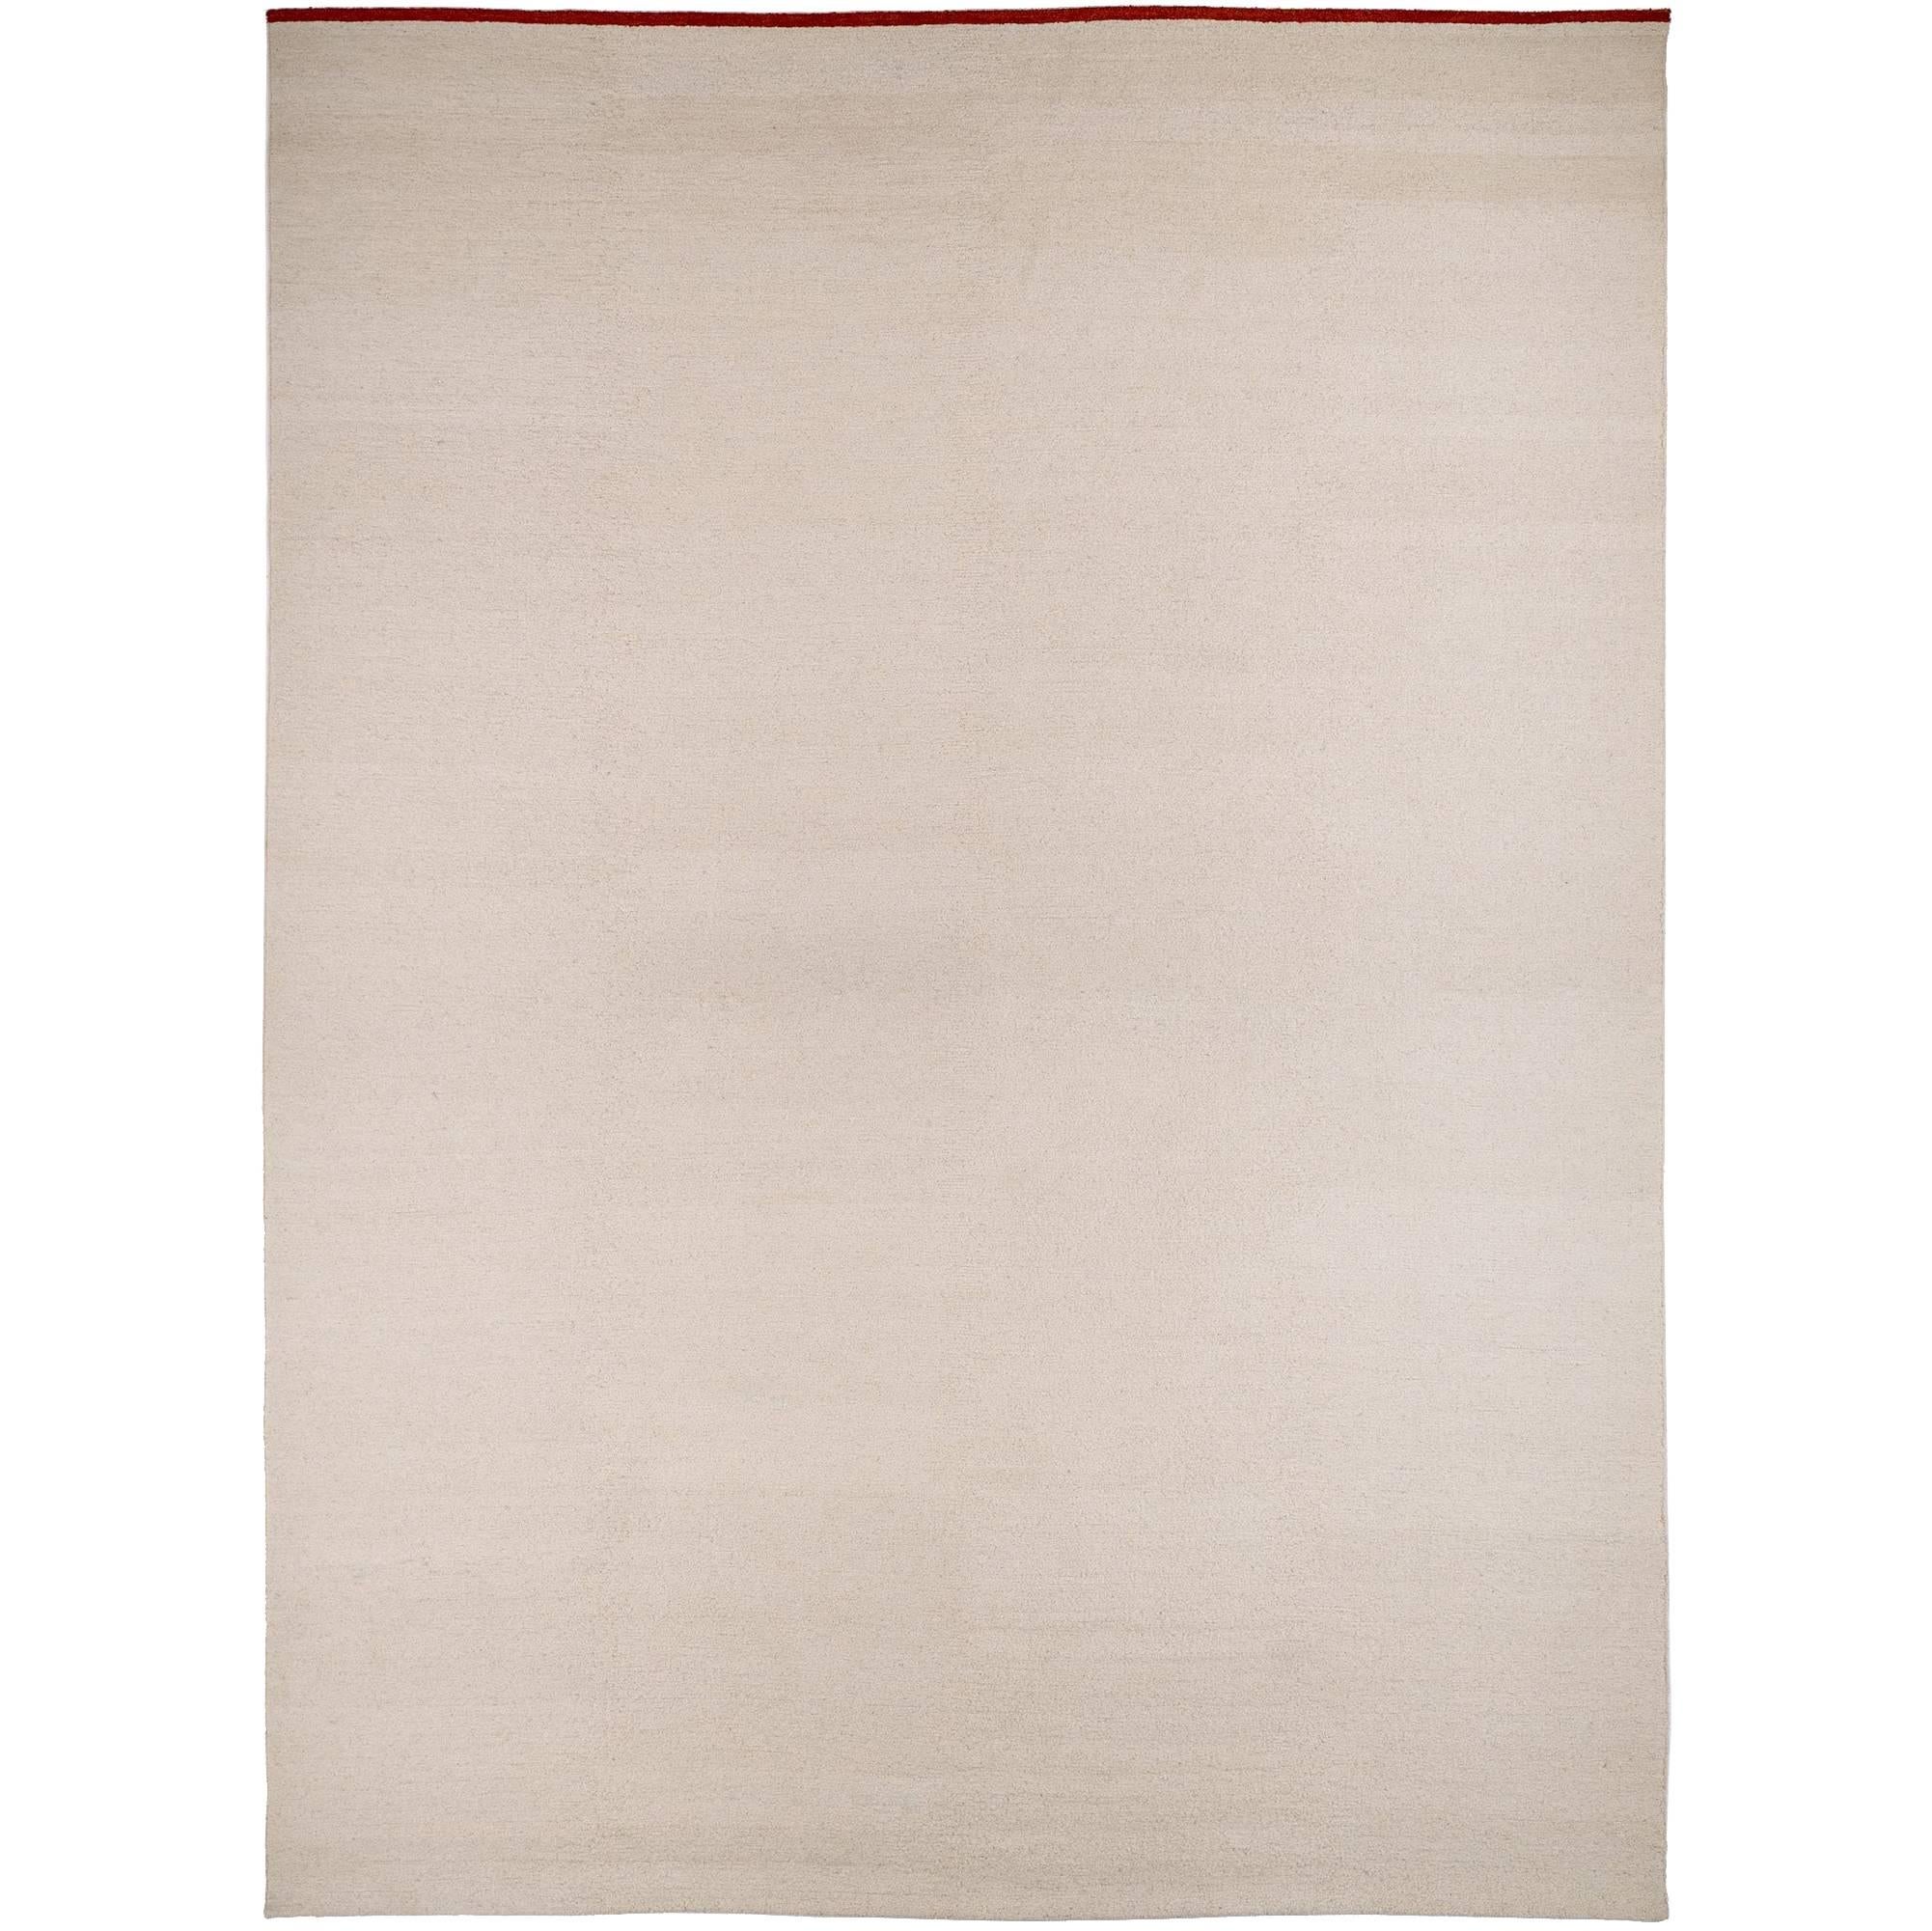 Natural White Wool Rug with Red Accent Stripe